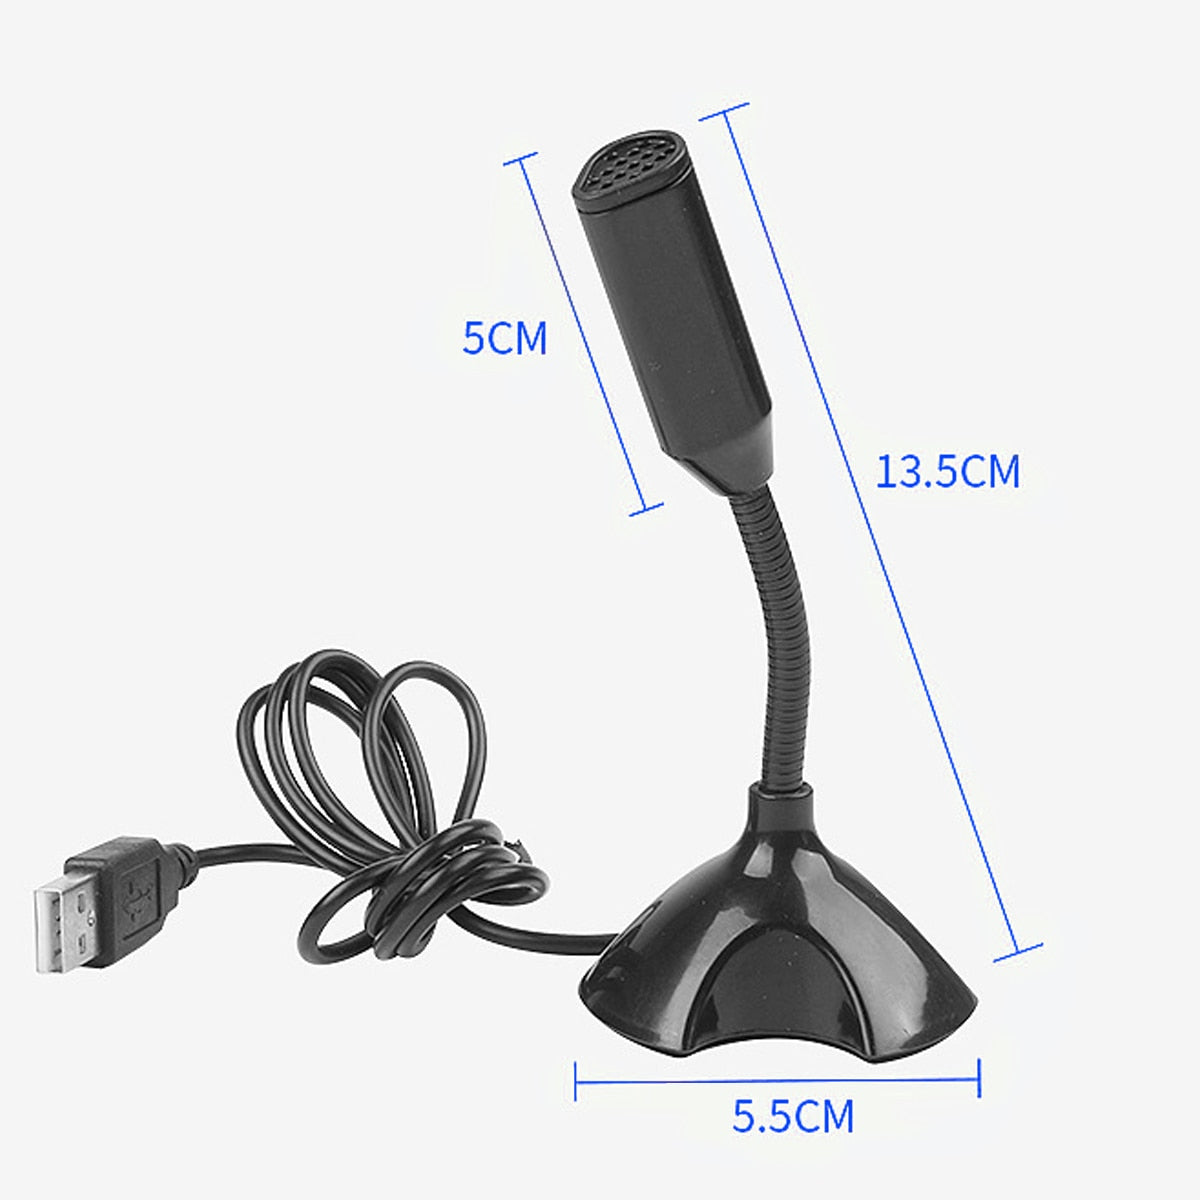 USB Microphone for laptop and Computers Adjustable Studio Singing Gaming Streaming With Holder Desktop